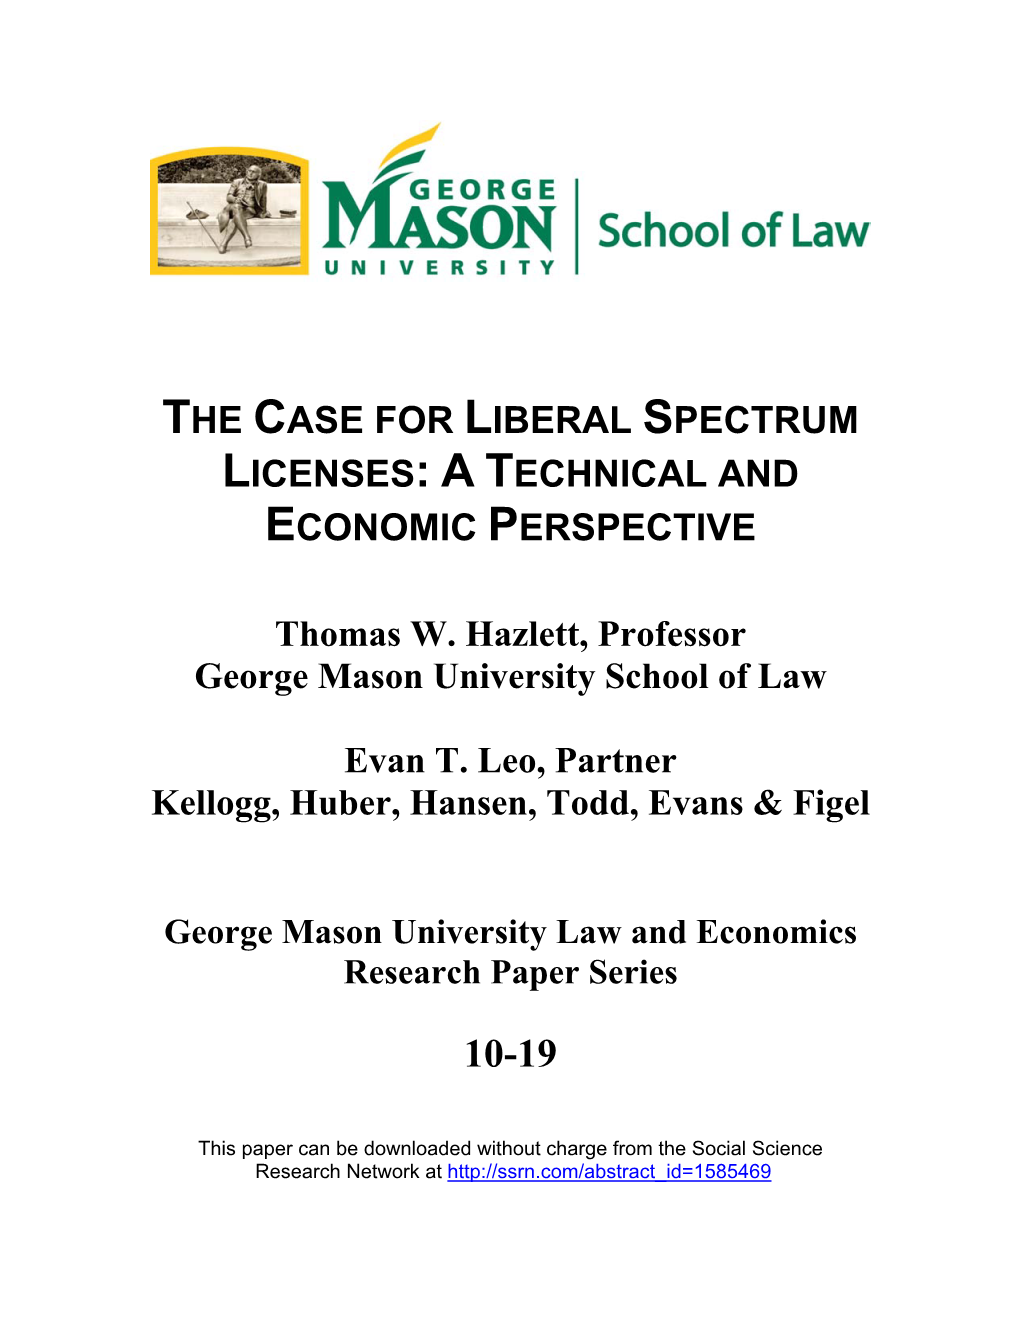 The Case for Liberal Spectrum Licenses: a Technical and Economic Perspective